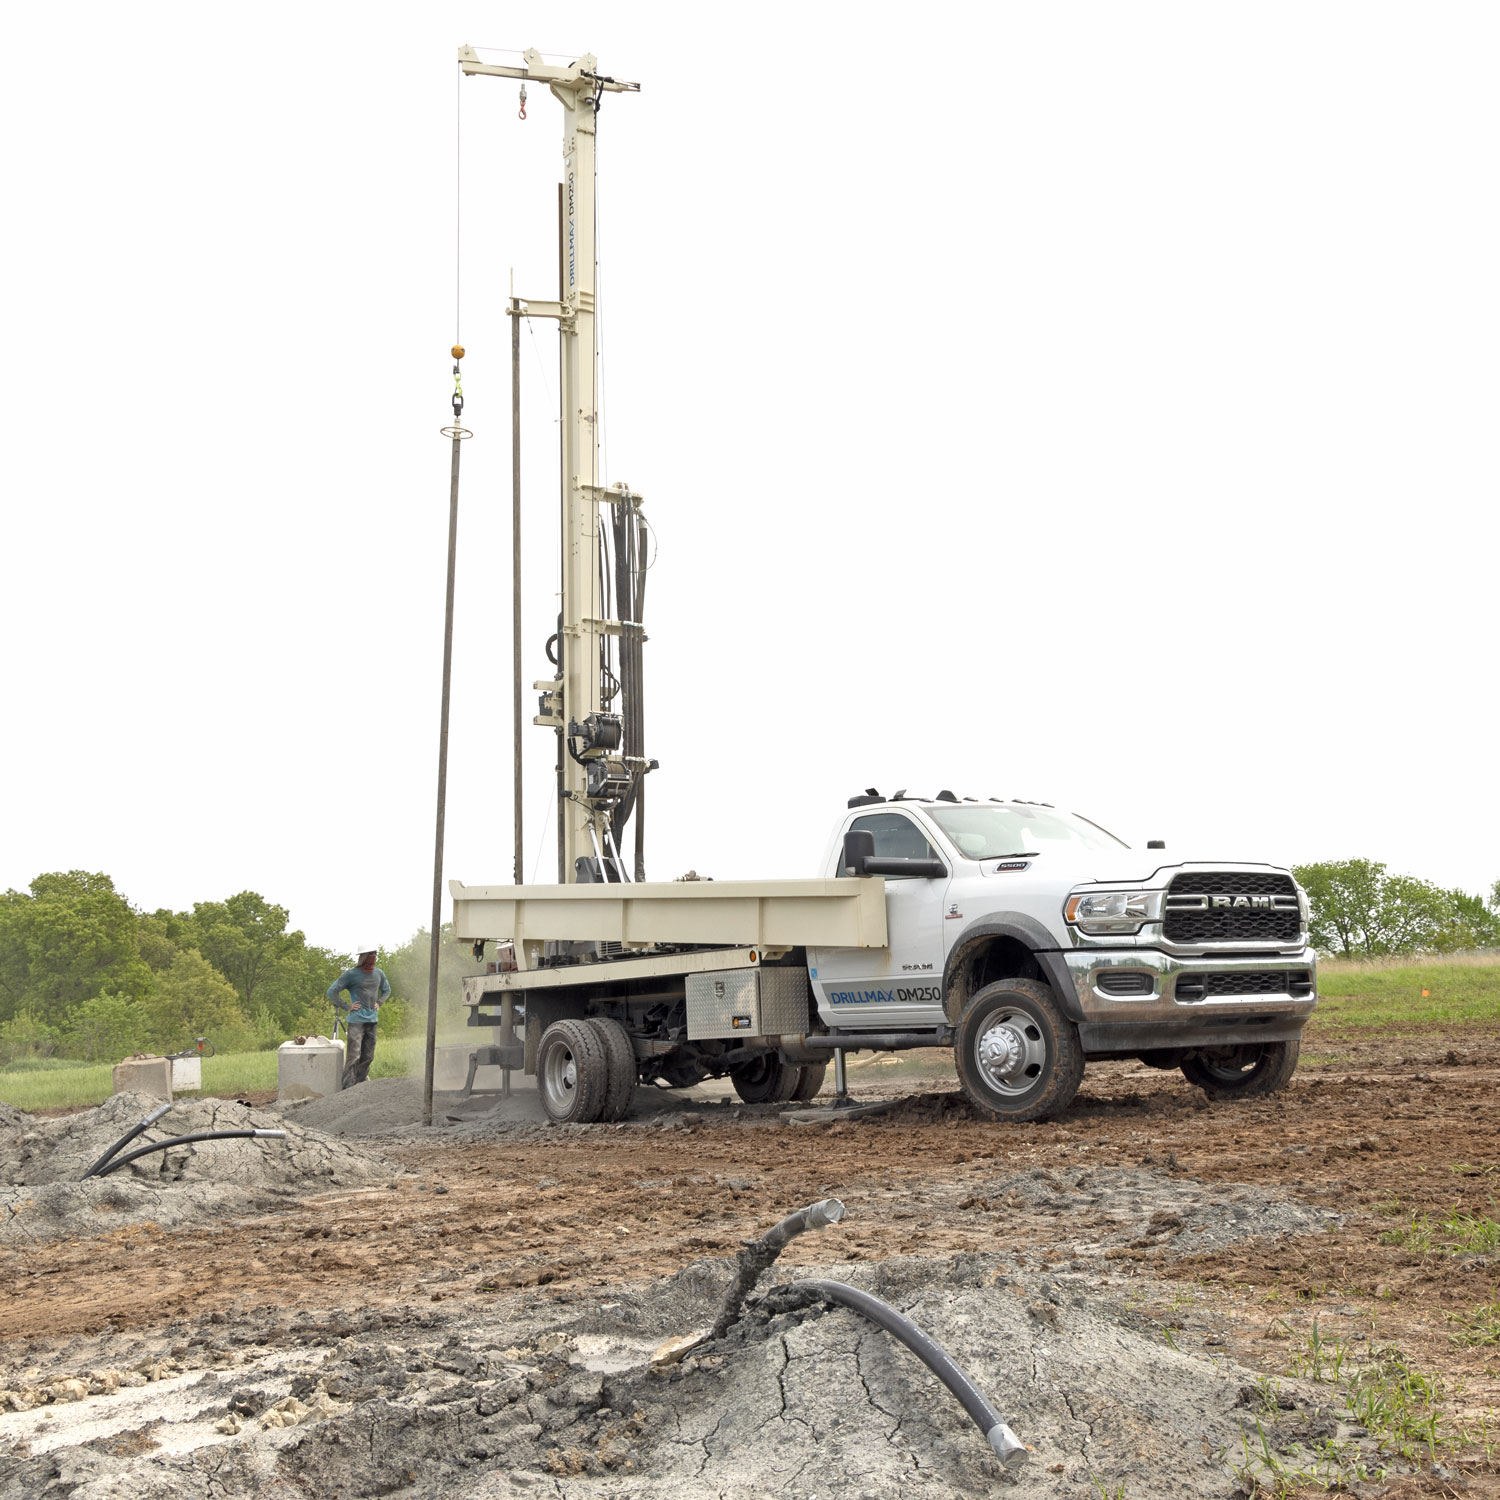 Drill rigs for sale suited for geothermal drilling include the DM250. The geothermal drilling rig withstands the pace of commercial and residential geothermal drilling.